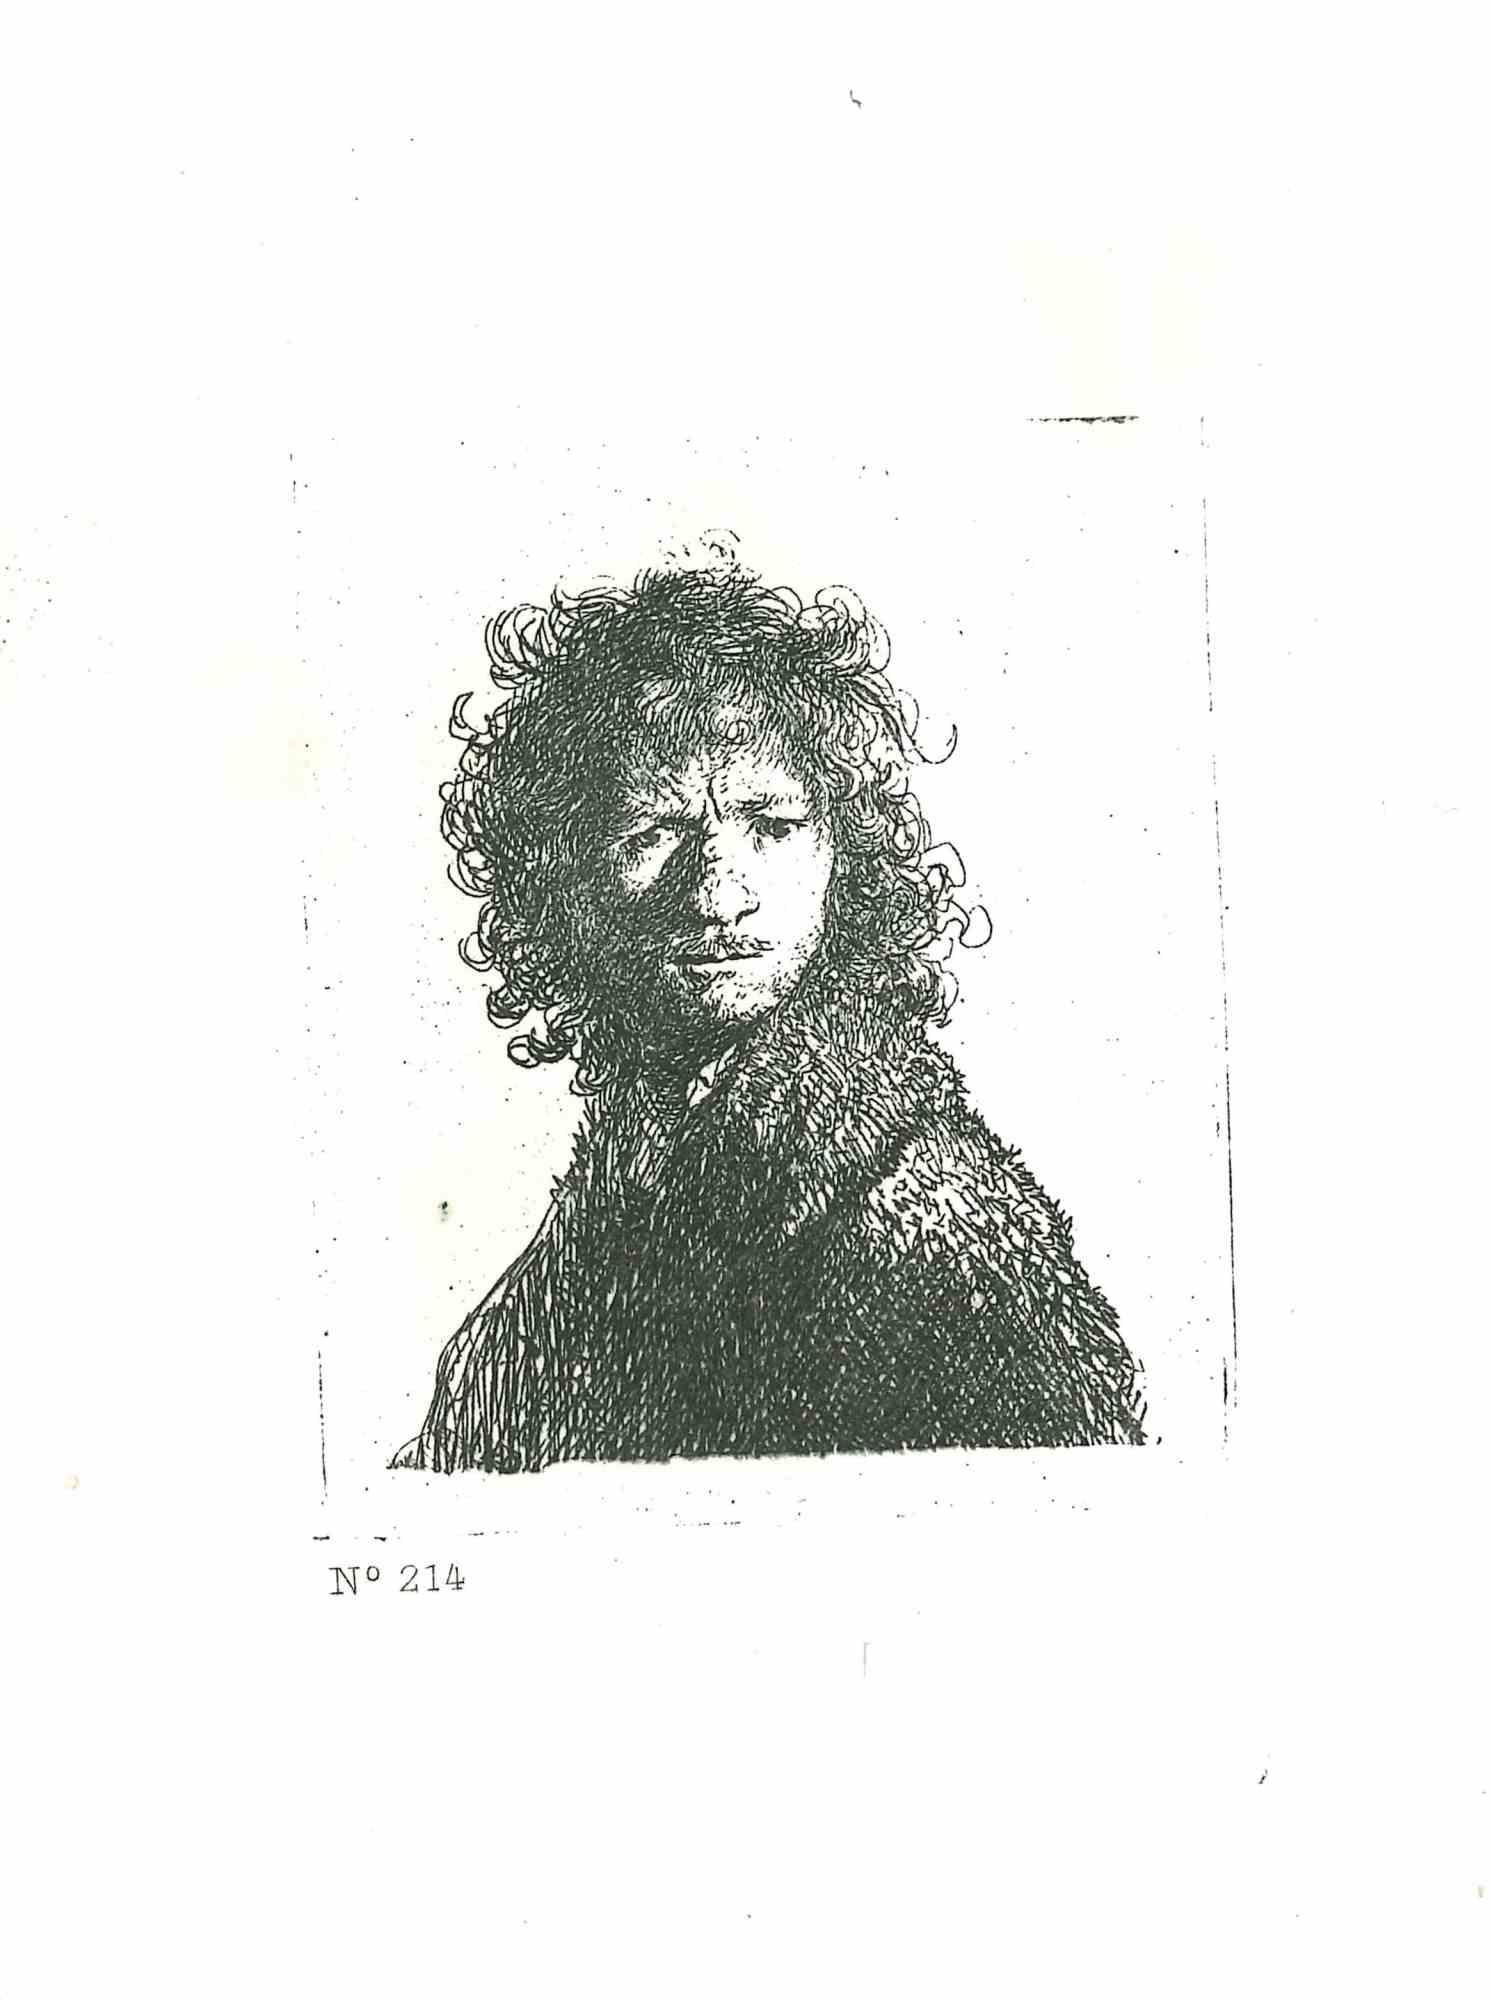 Charles Amand Durand Figurative Print - Self-Portrait, Frowning - Engraving after Rembrandt - 19th Century